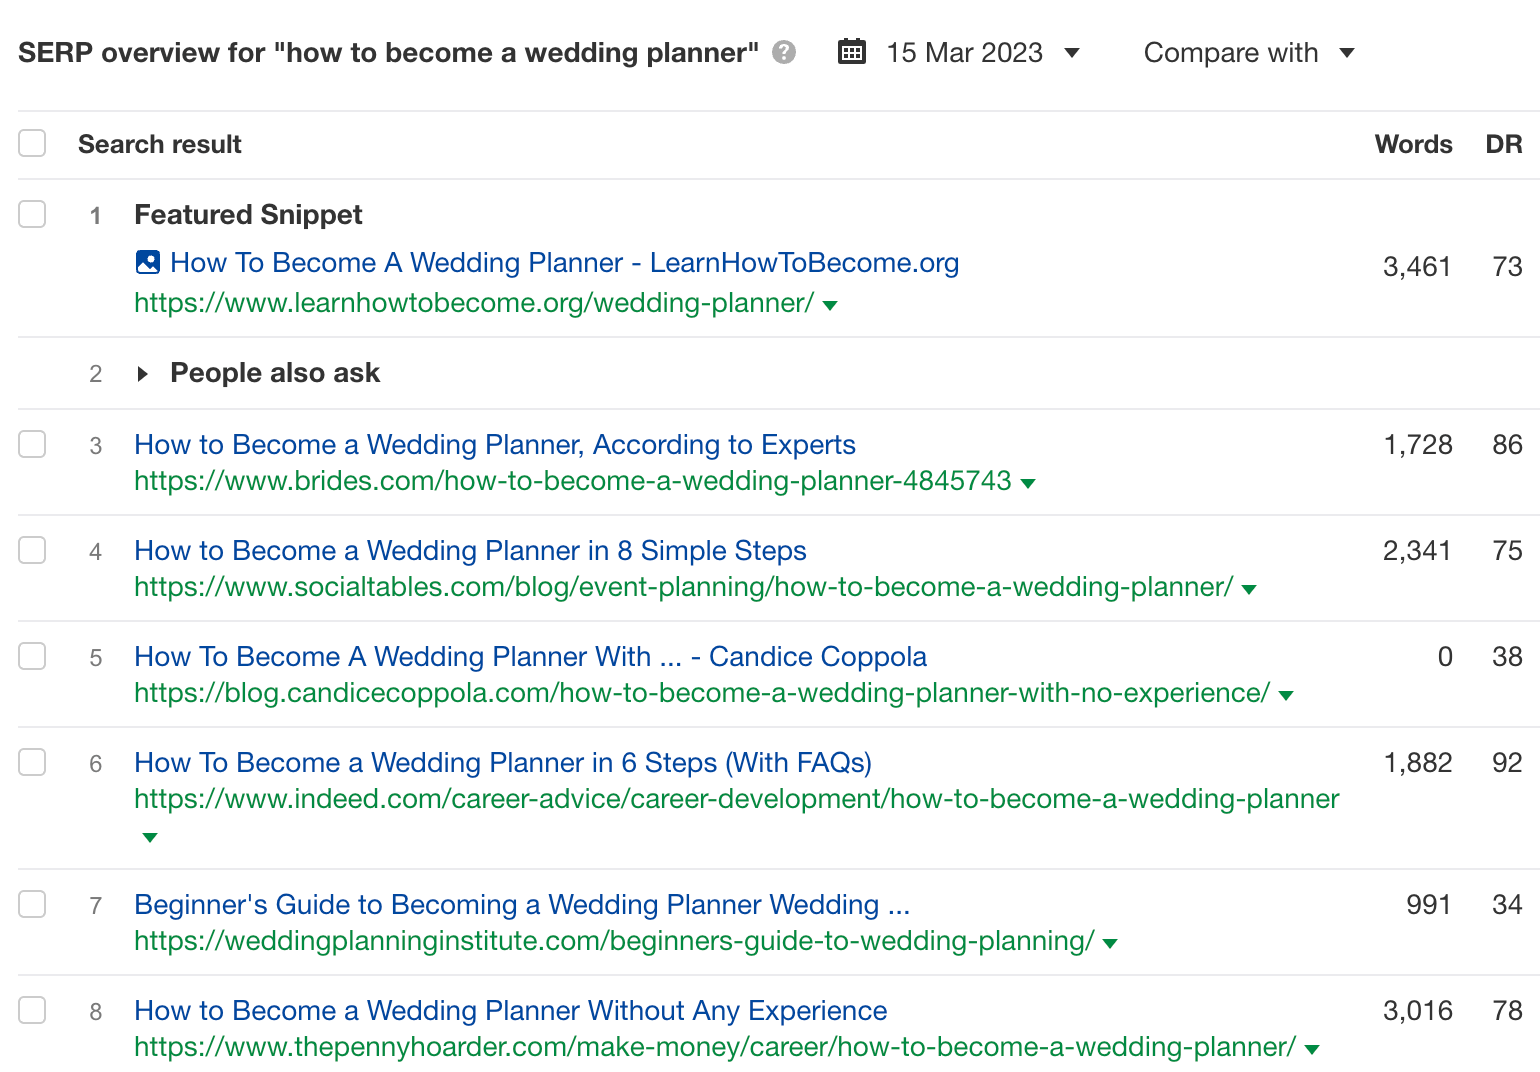 SERP overview for "how to become a wedding planner," via Ahrefs' Keywords Explorer